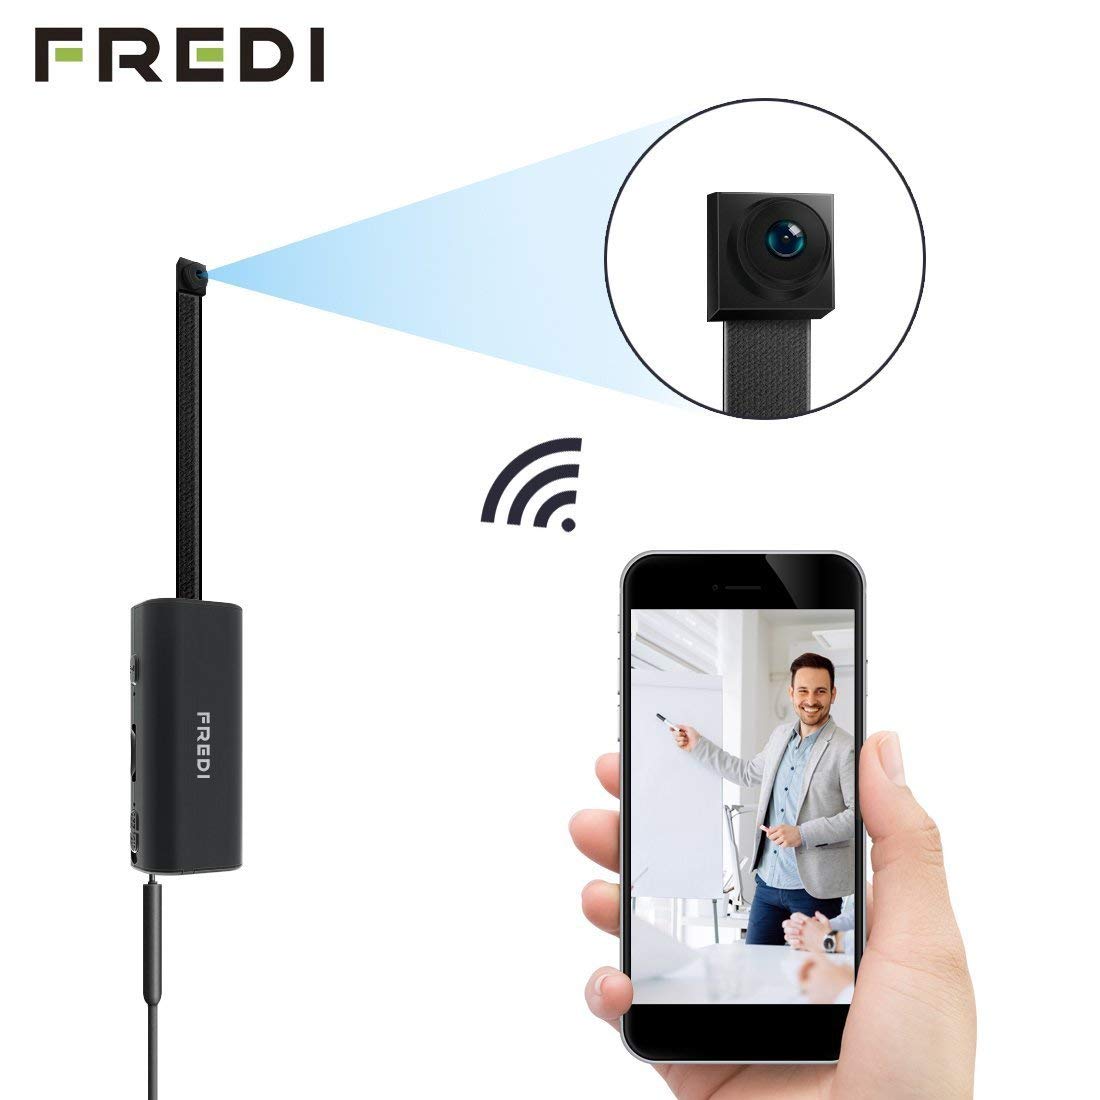 Hidden Camera,FREDI Spy Camera 720P Wireless WiFi IP Cameras Home/Office Security Mini Portable Covert Nanny Cam Works for iPhone iOS/Android mobilephone